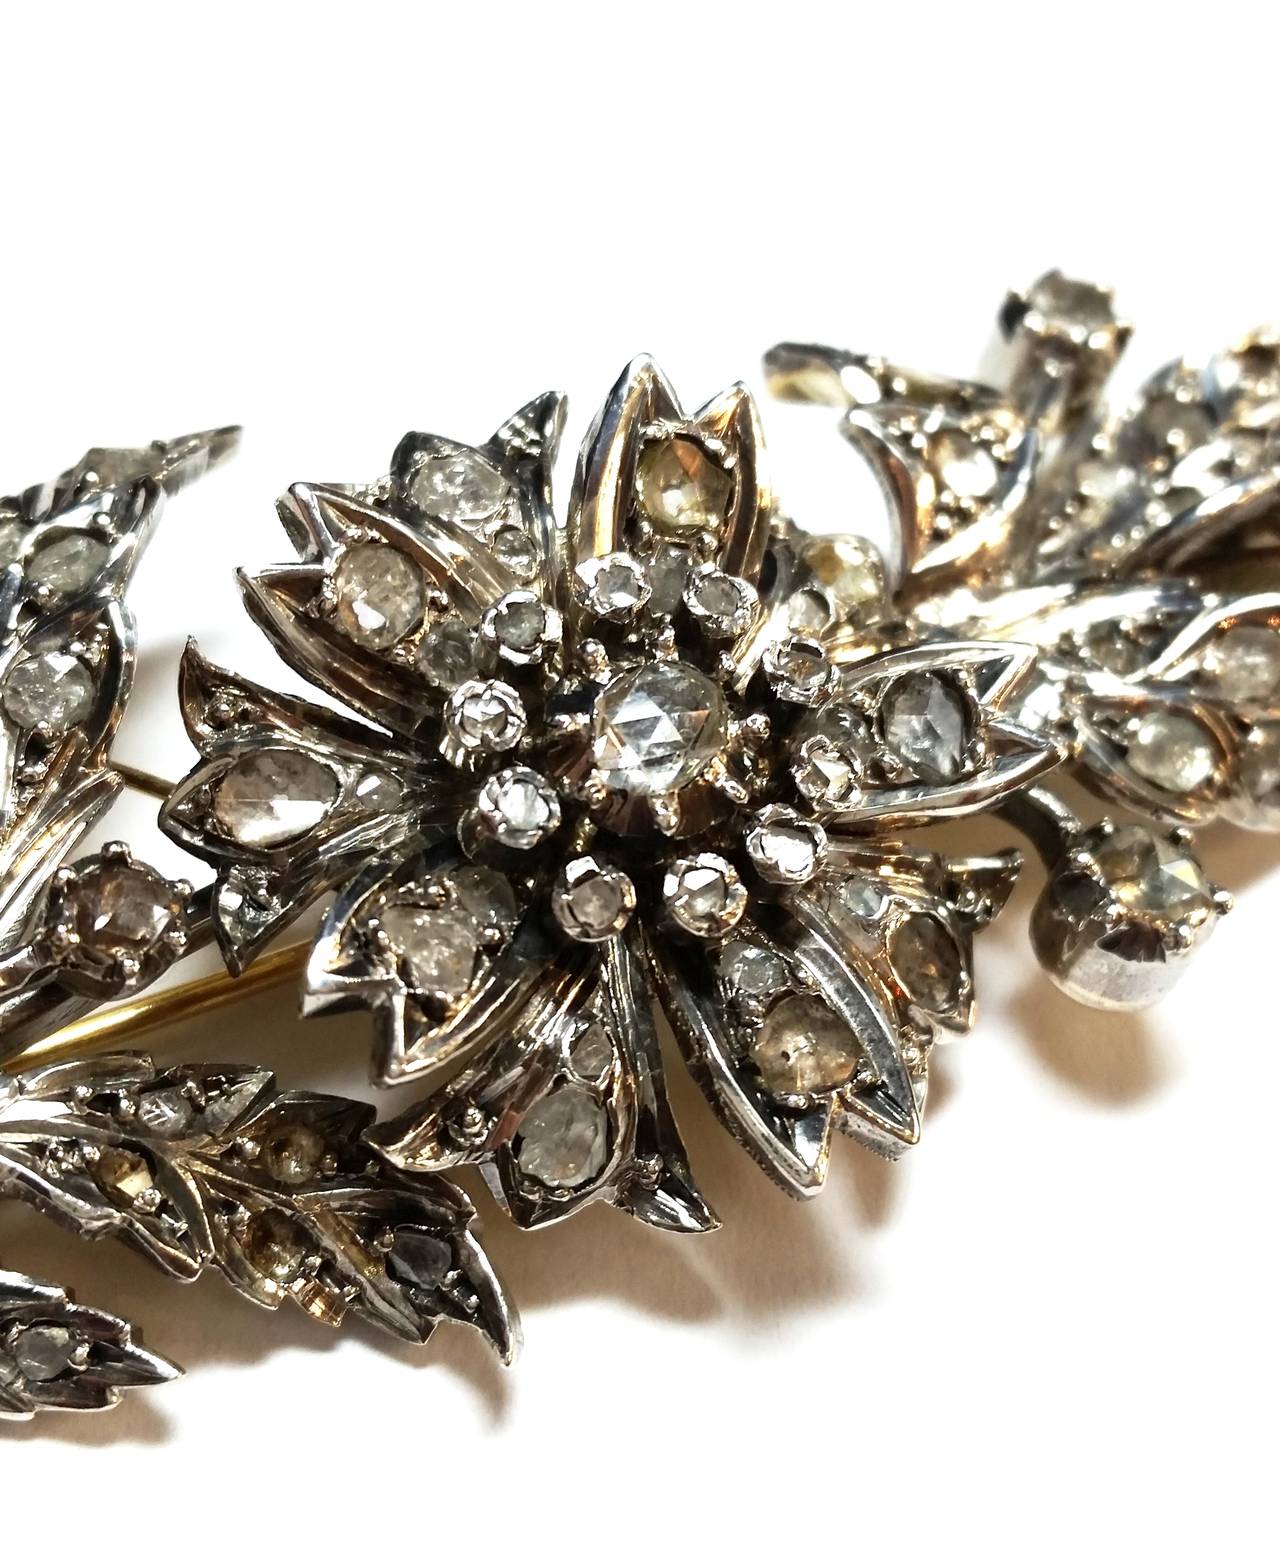 Antique flower brooch in yellow gold and silver, with rose cut diamonds